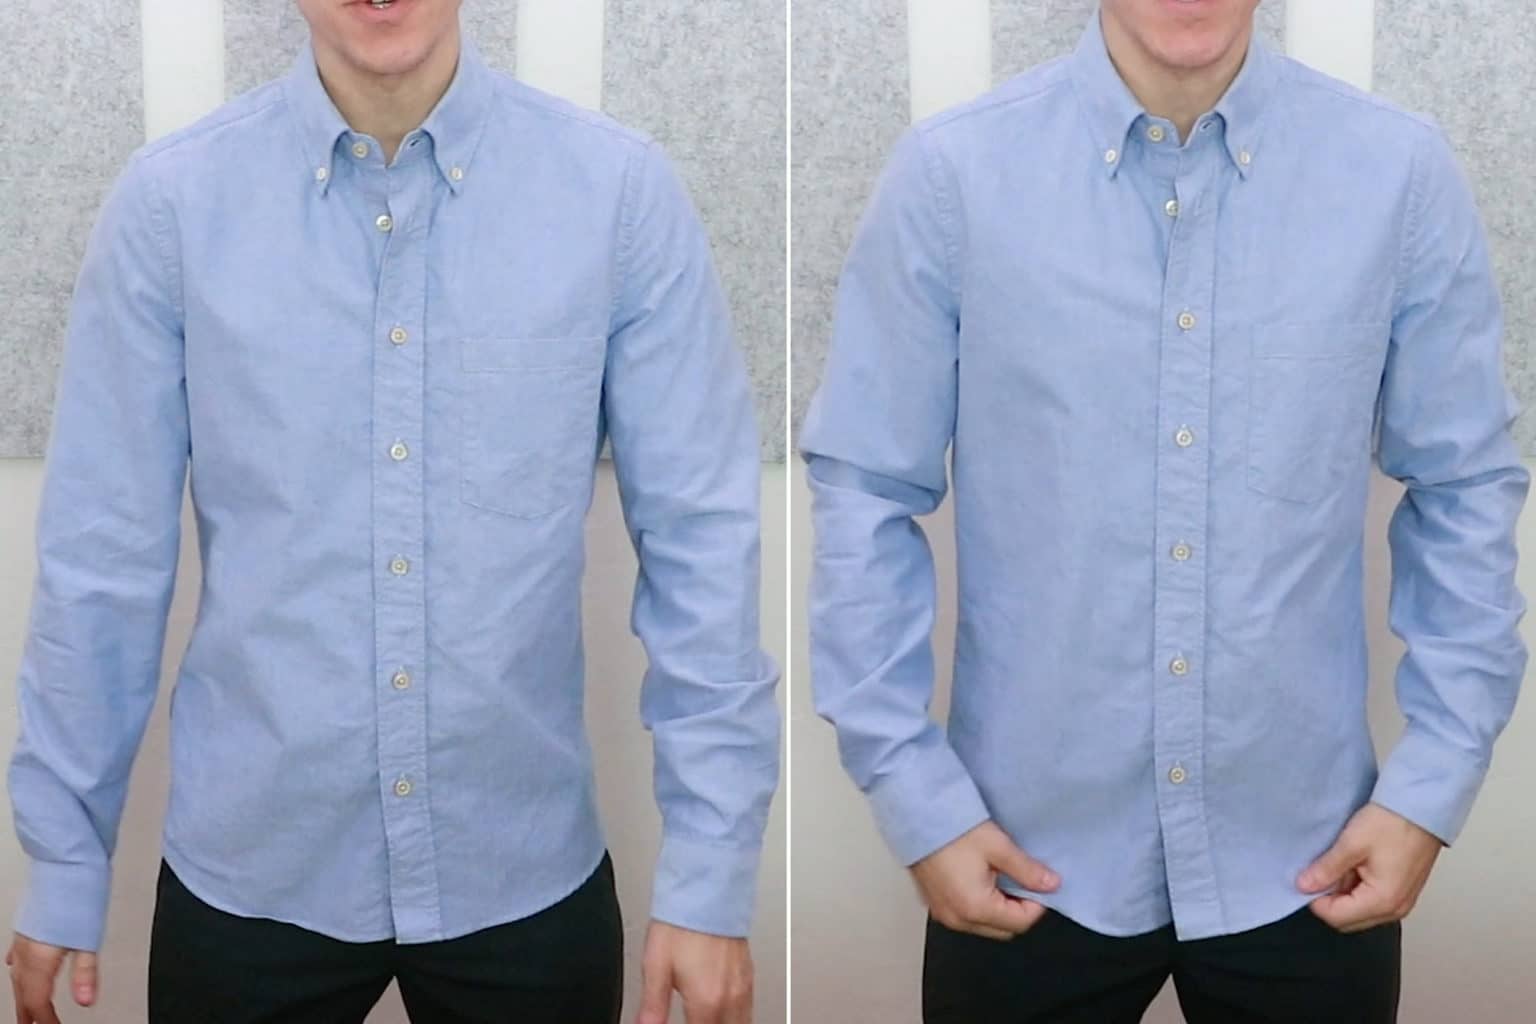 How a Button Up Shirt Should Fit | Button Down Fit Guide - TMM